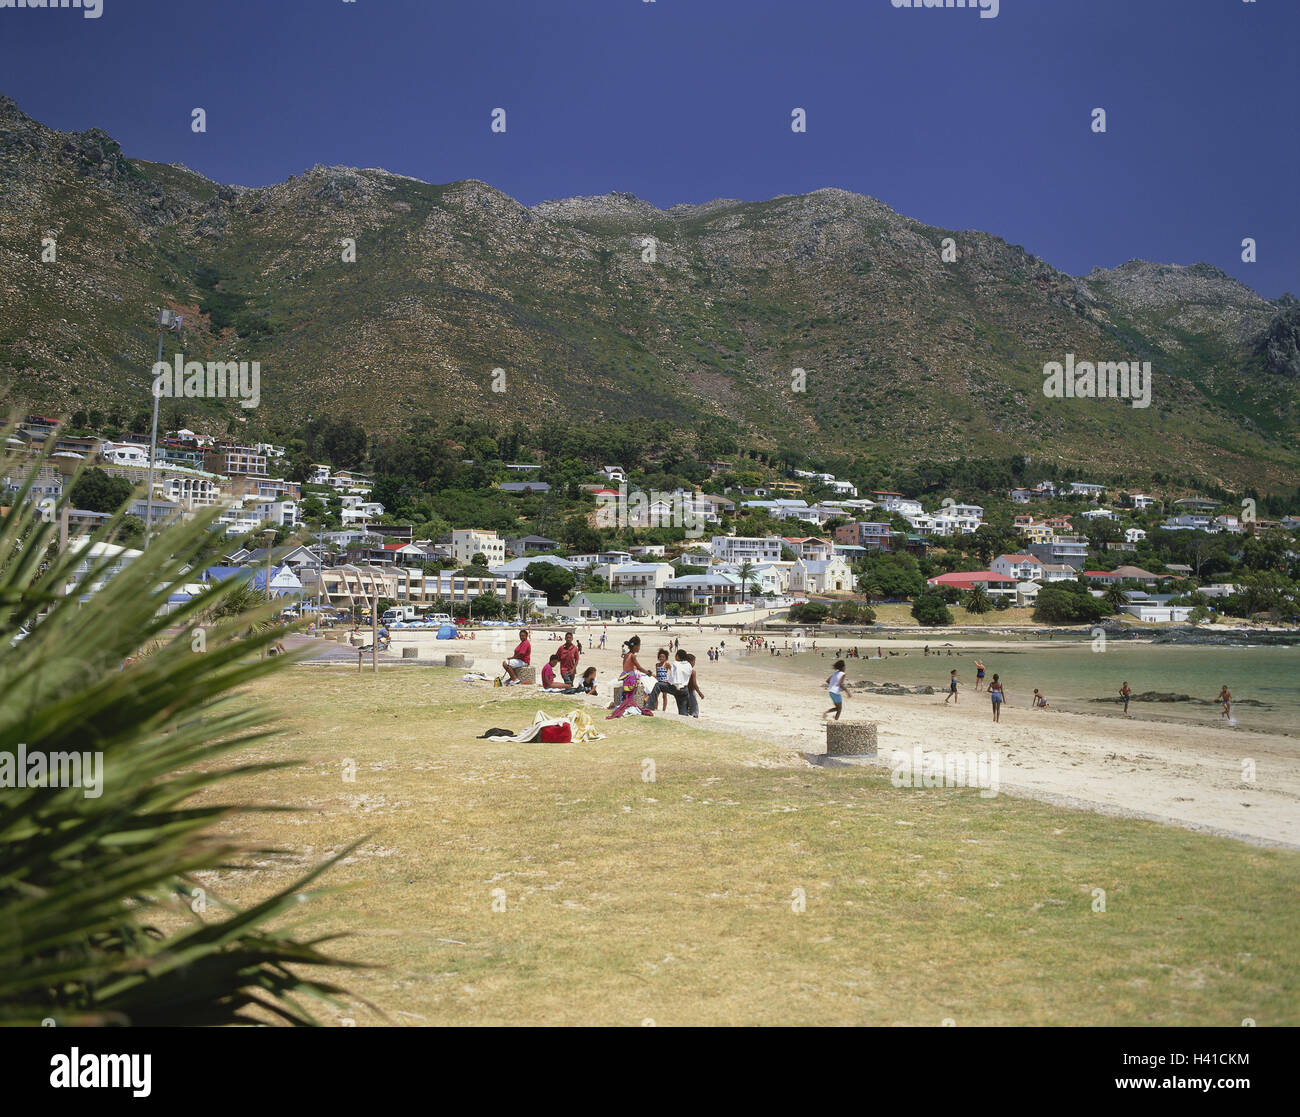 South, Africa, cape region, Gordons Bay, local view, beach, Africa, cape region, cape half island, west cape, western cape, beach, place, resort, mountains Stock Photo